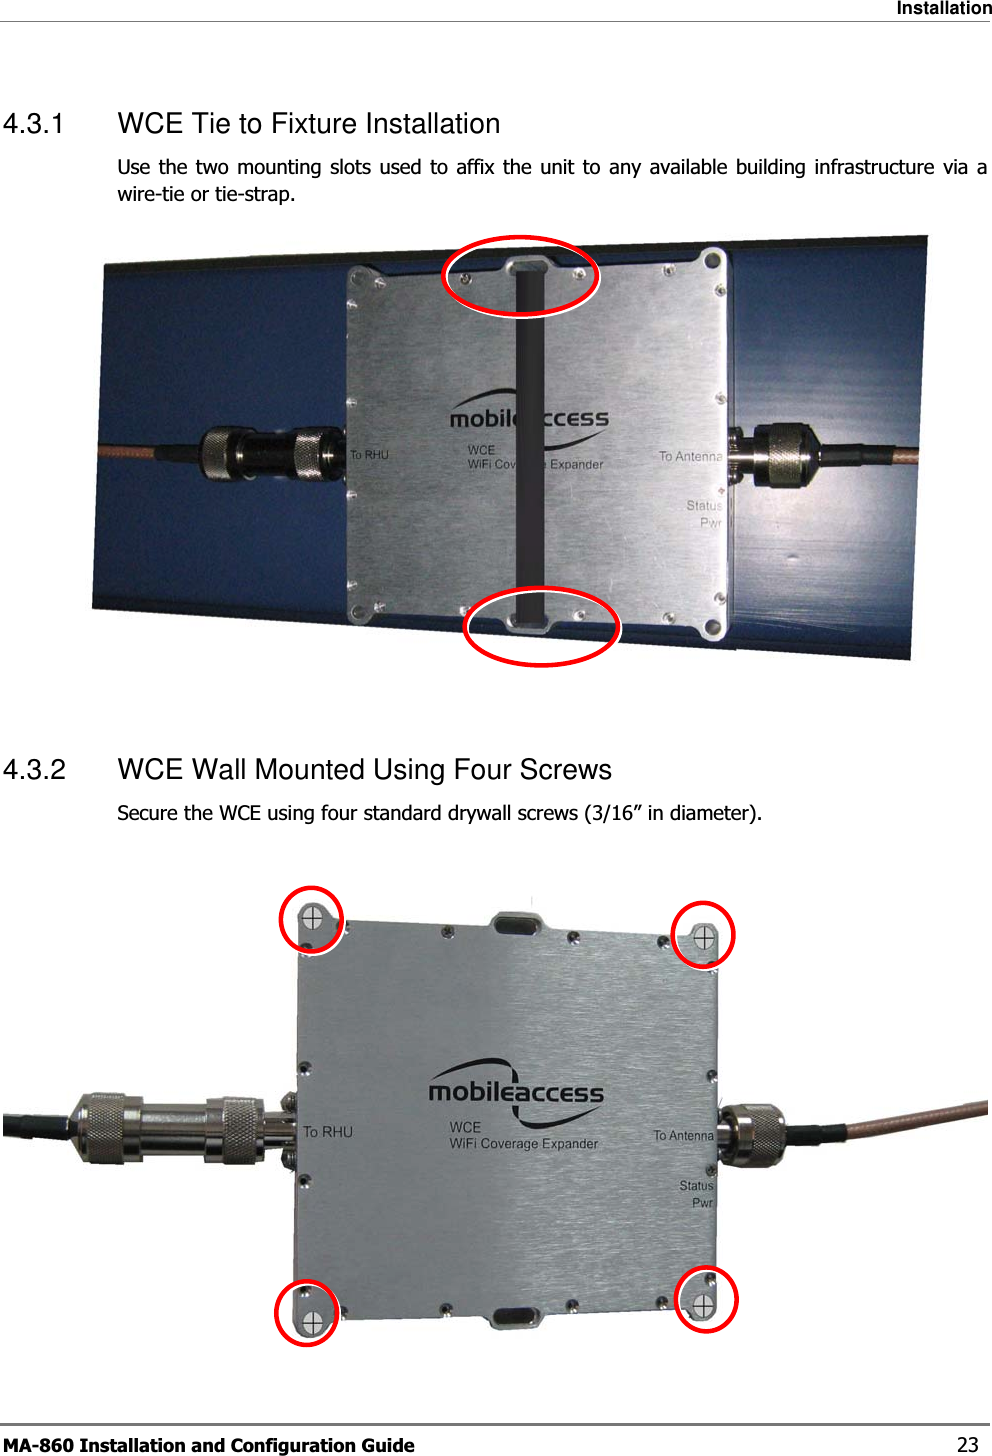 Installation MA-860 Installation and Configuration Guide    23 4.3.1  WCE Tie to Fixture Installation Use the two mounting slots used to affix the unit to any available building infrastructure via a wire-tie or tie-strap.    4.3.2  WCE Wall Mounted Using Four Screws Secure the WCE using four standard drywall screws (3/16” in diameter).   